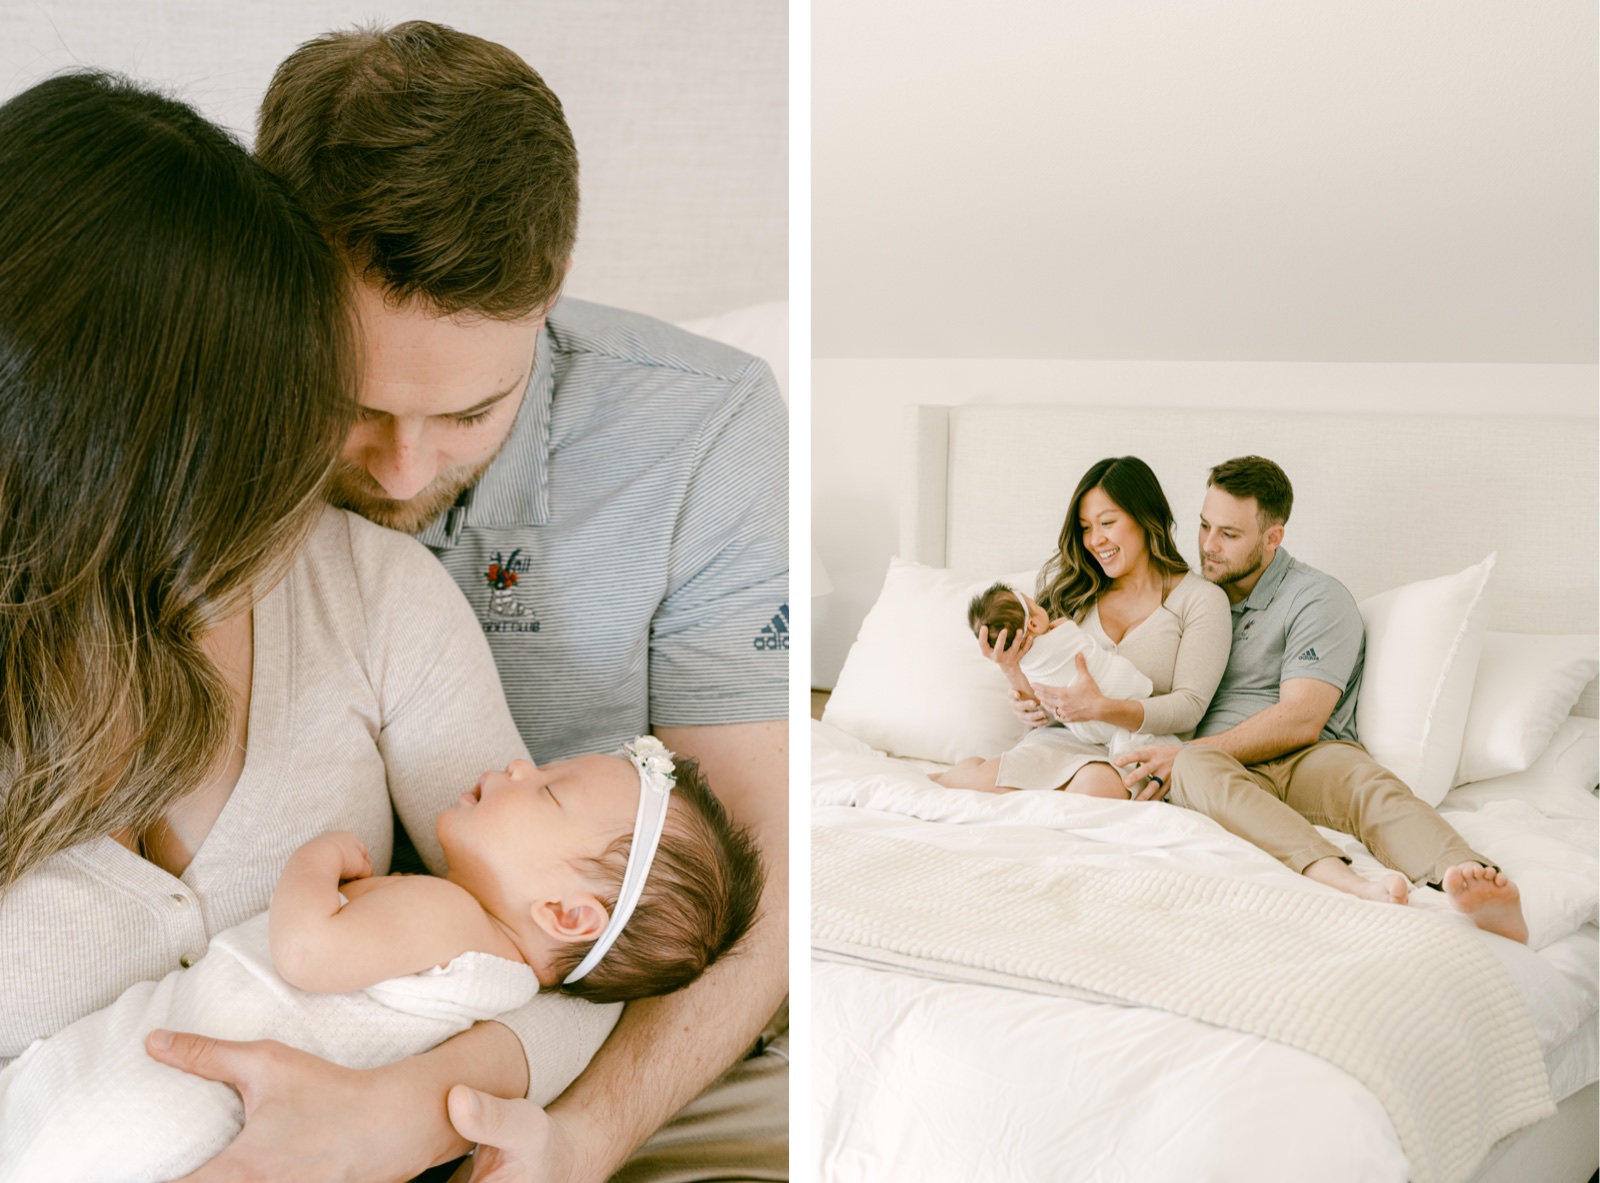 Young Denver couple admiring their baby during a newborn portrait session